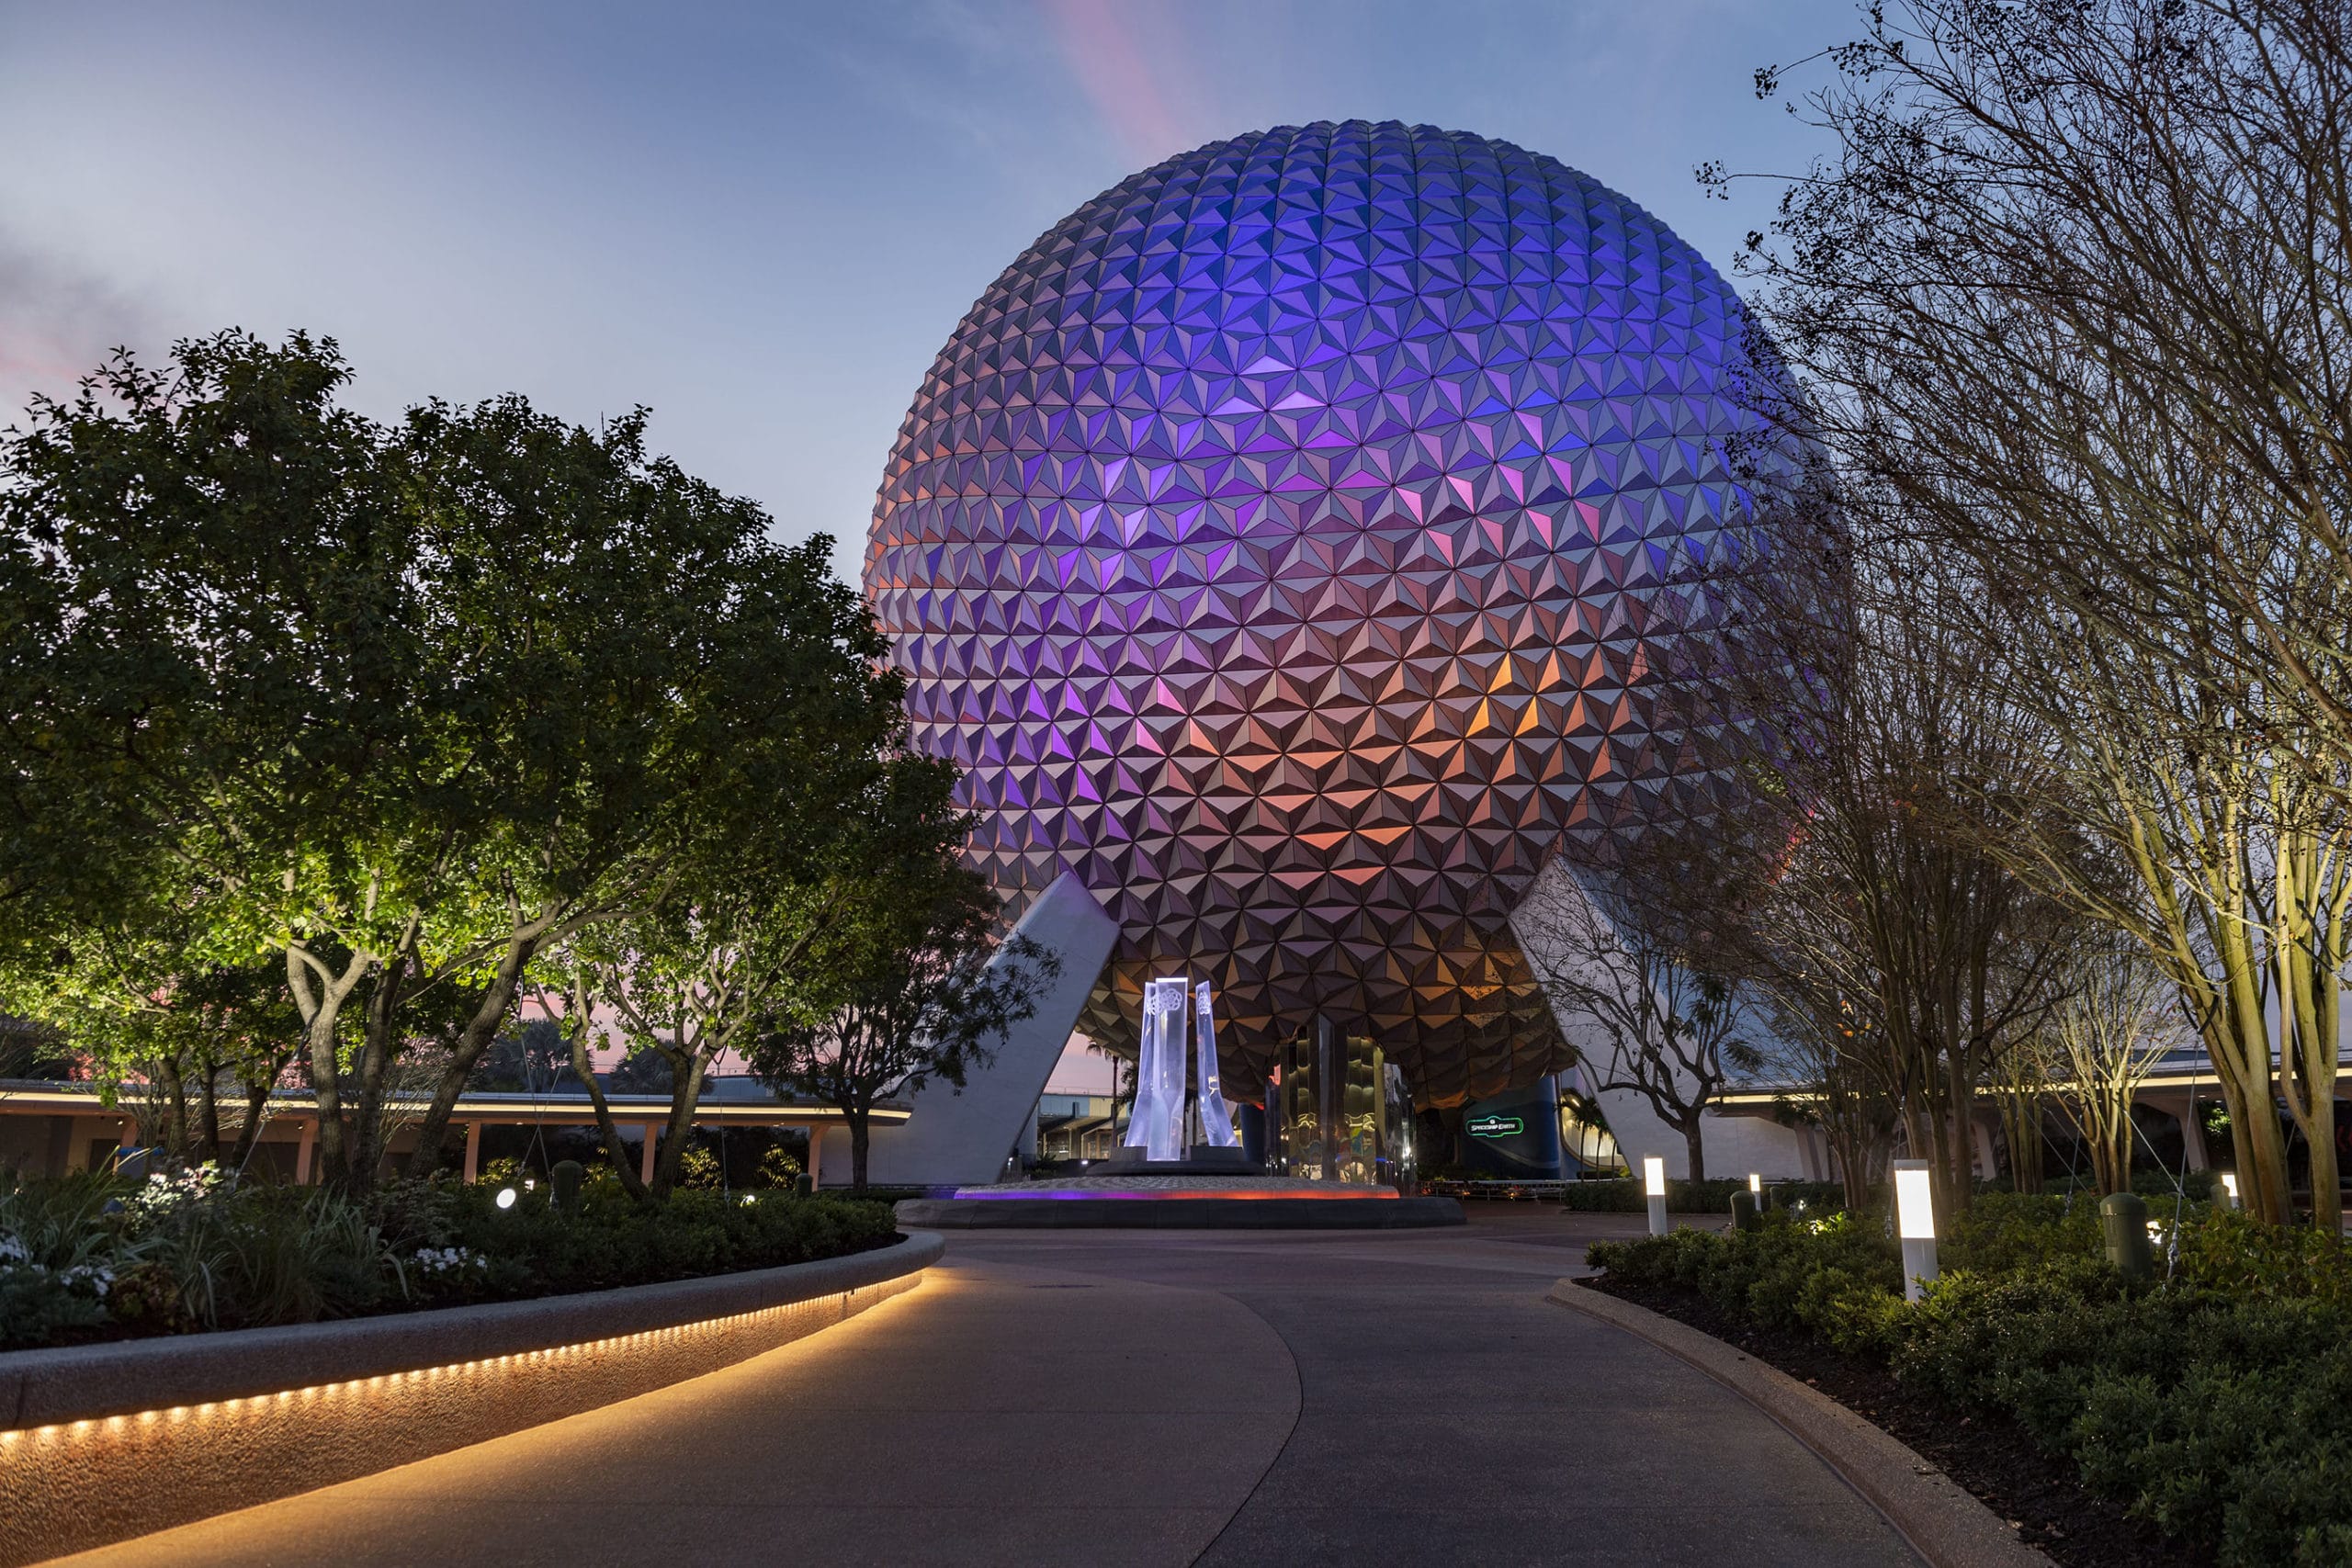 Walt Disney World 2022 Packages Are Open For Booking! - Mickey Chatter